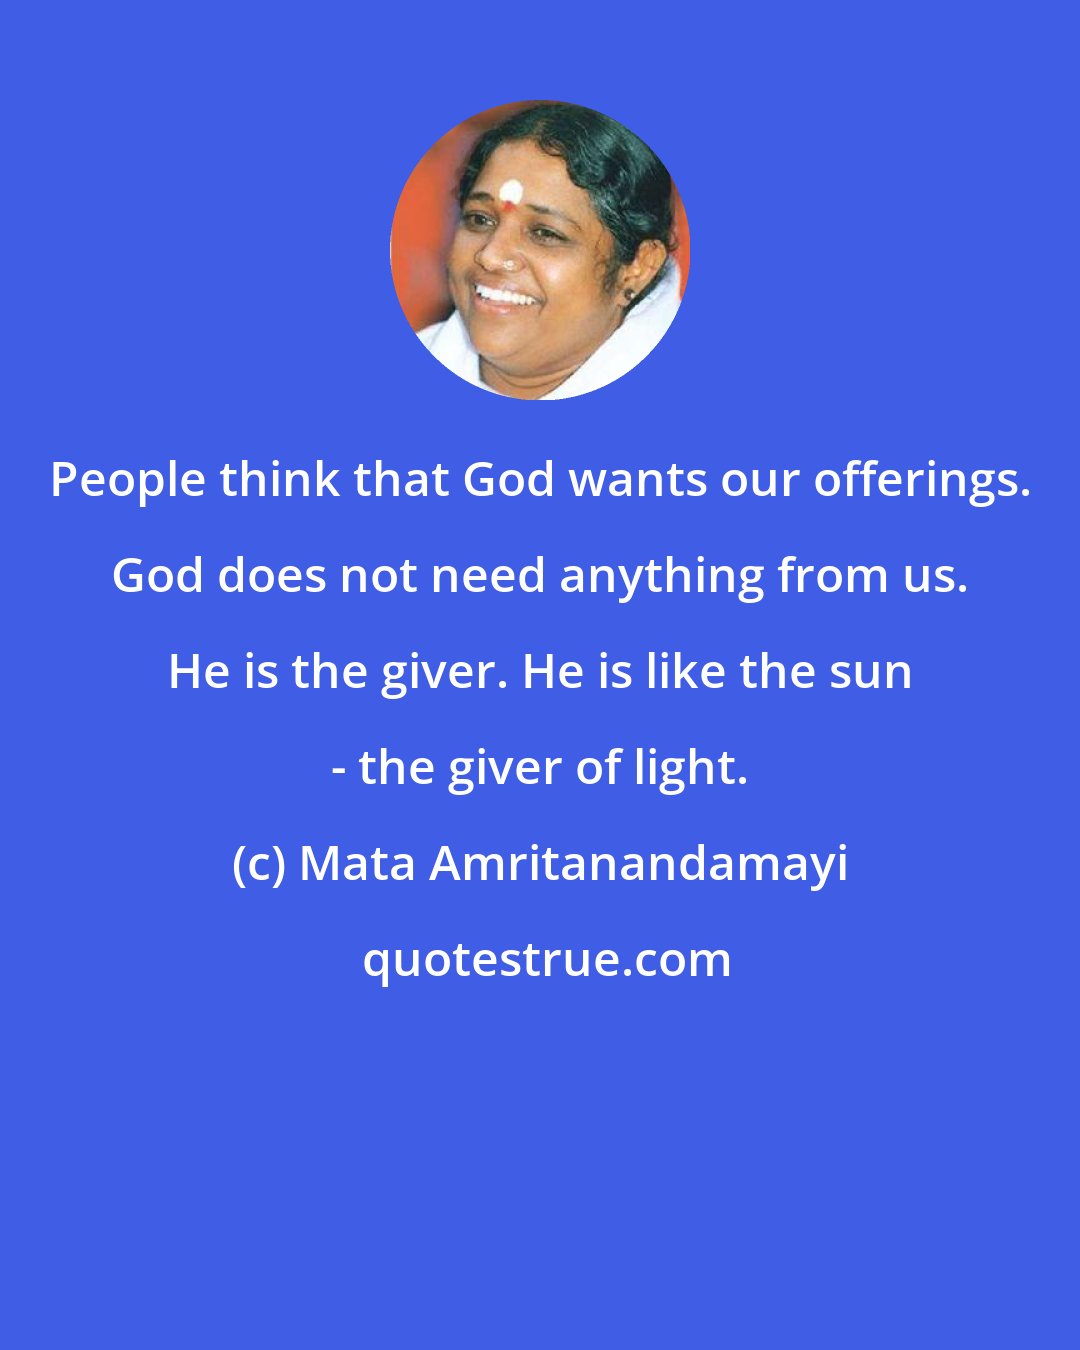 Mata Amritanandamayi: People think that God wants our offerings. God does not need anything from us. He is the giver. He is like the sun - the giver of light.